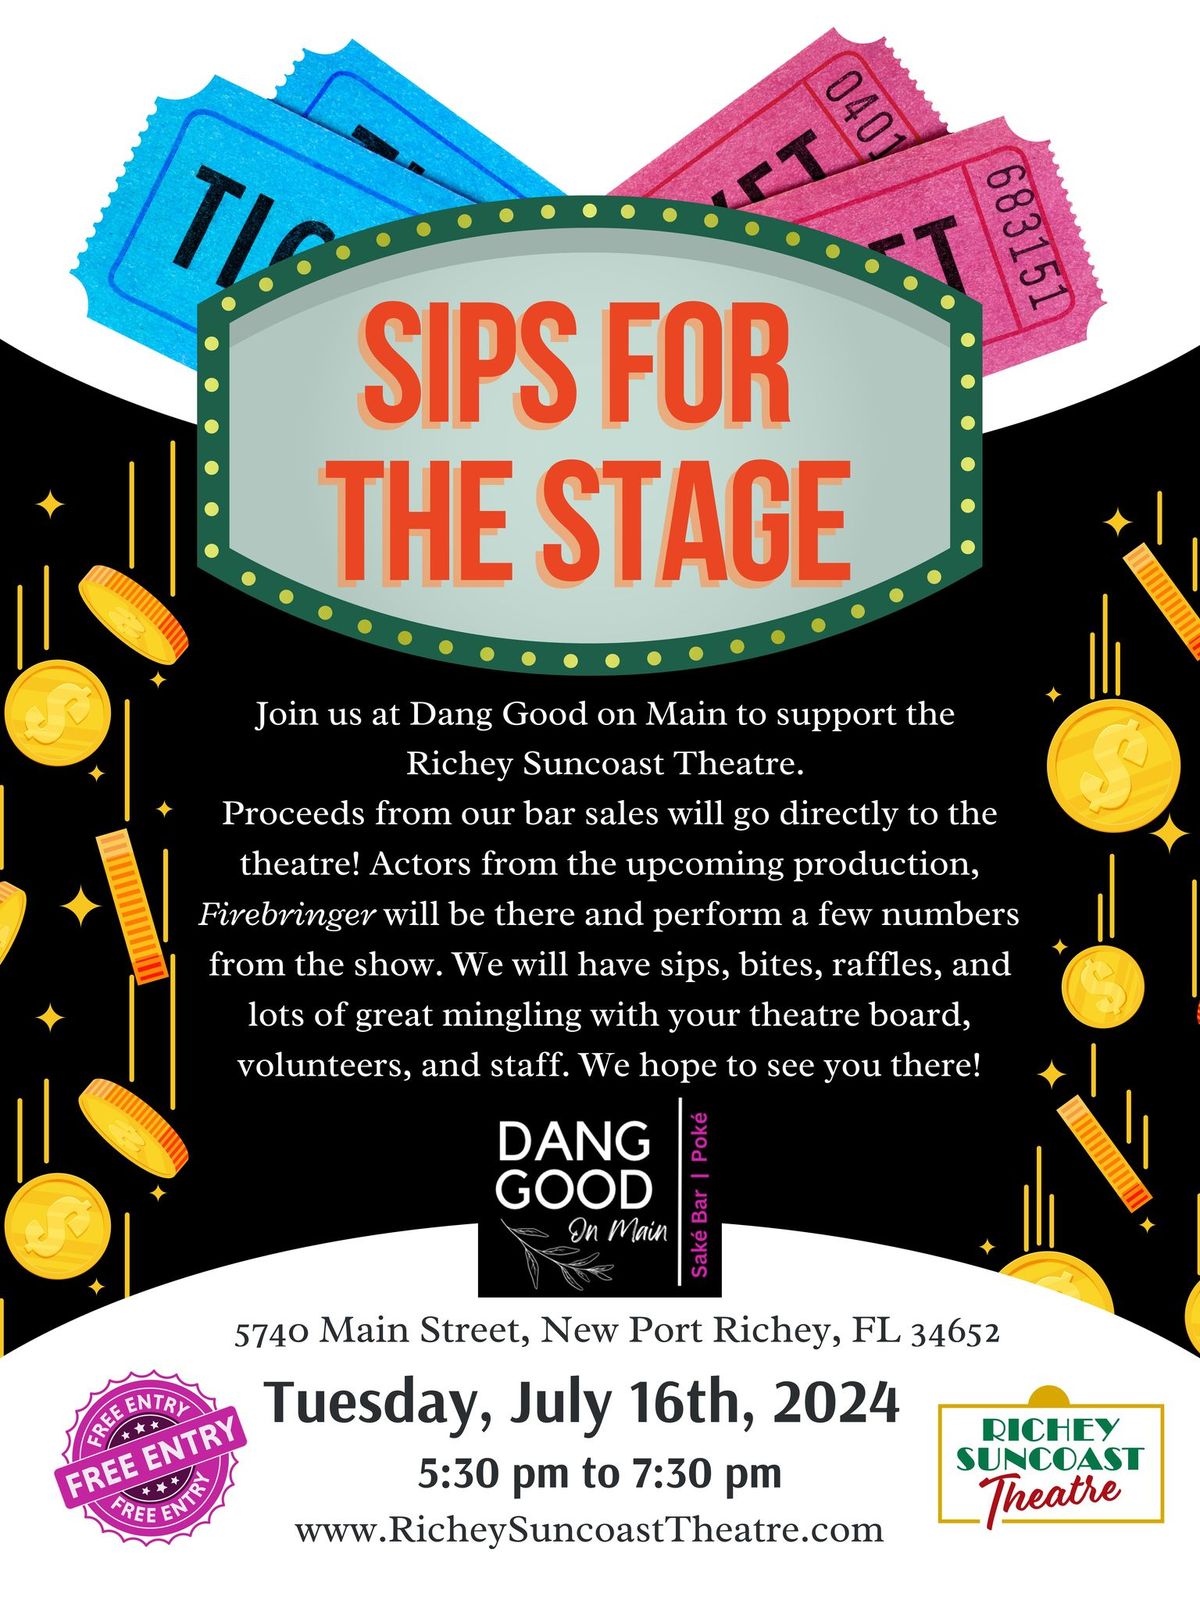 Sips For the Stage @ Dang Good on Main - Firebringer - A benefit for Richey Suncoast Theatre